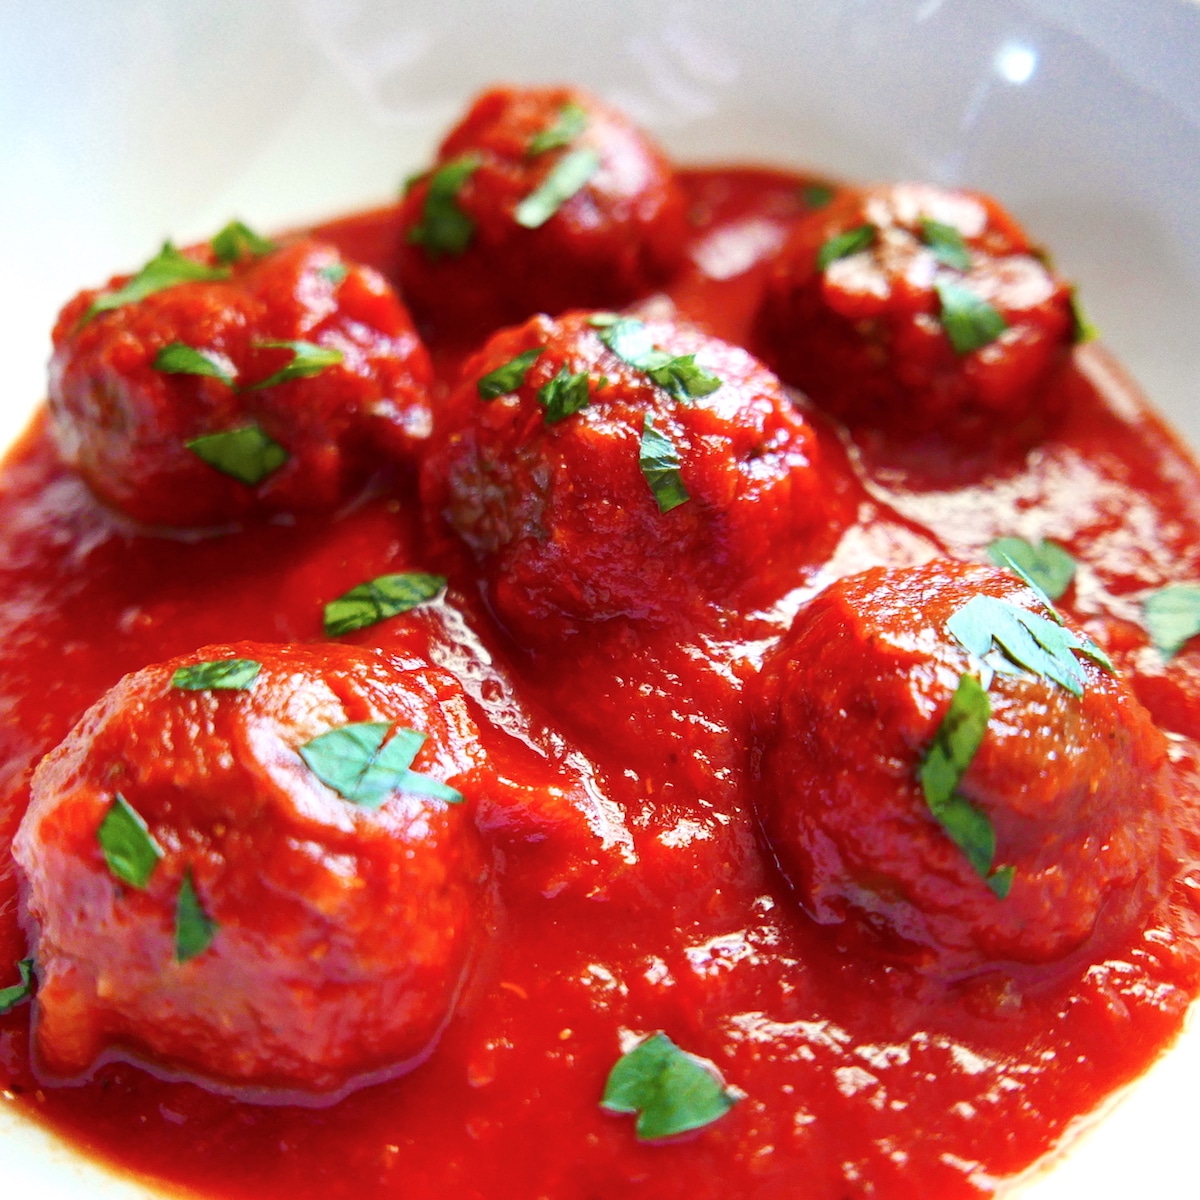 Impossible meatballs resting in a bowl of pasta sauce.